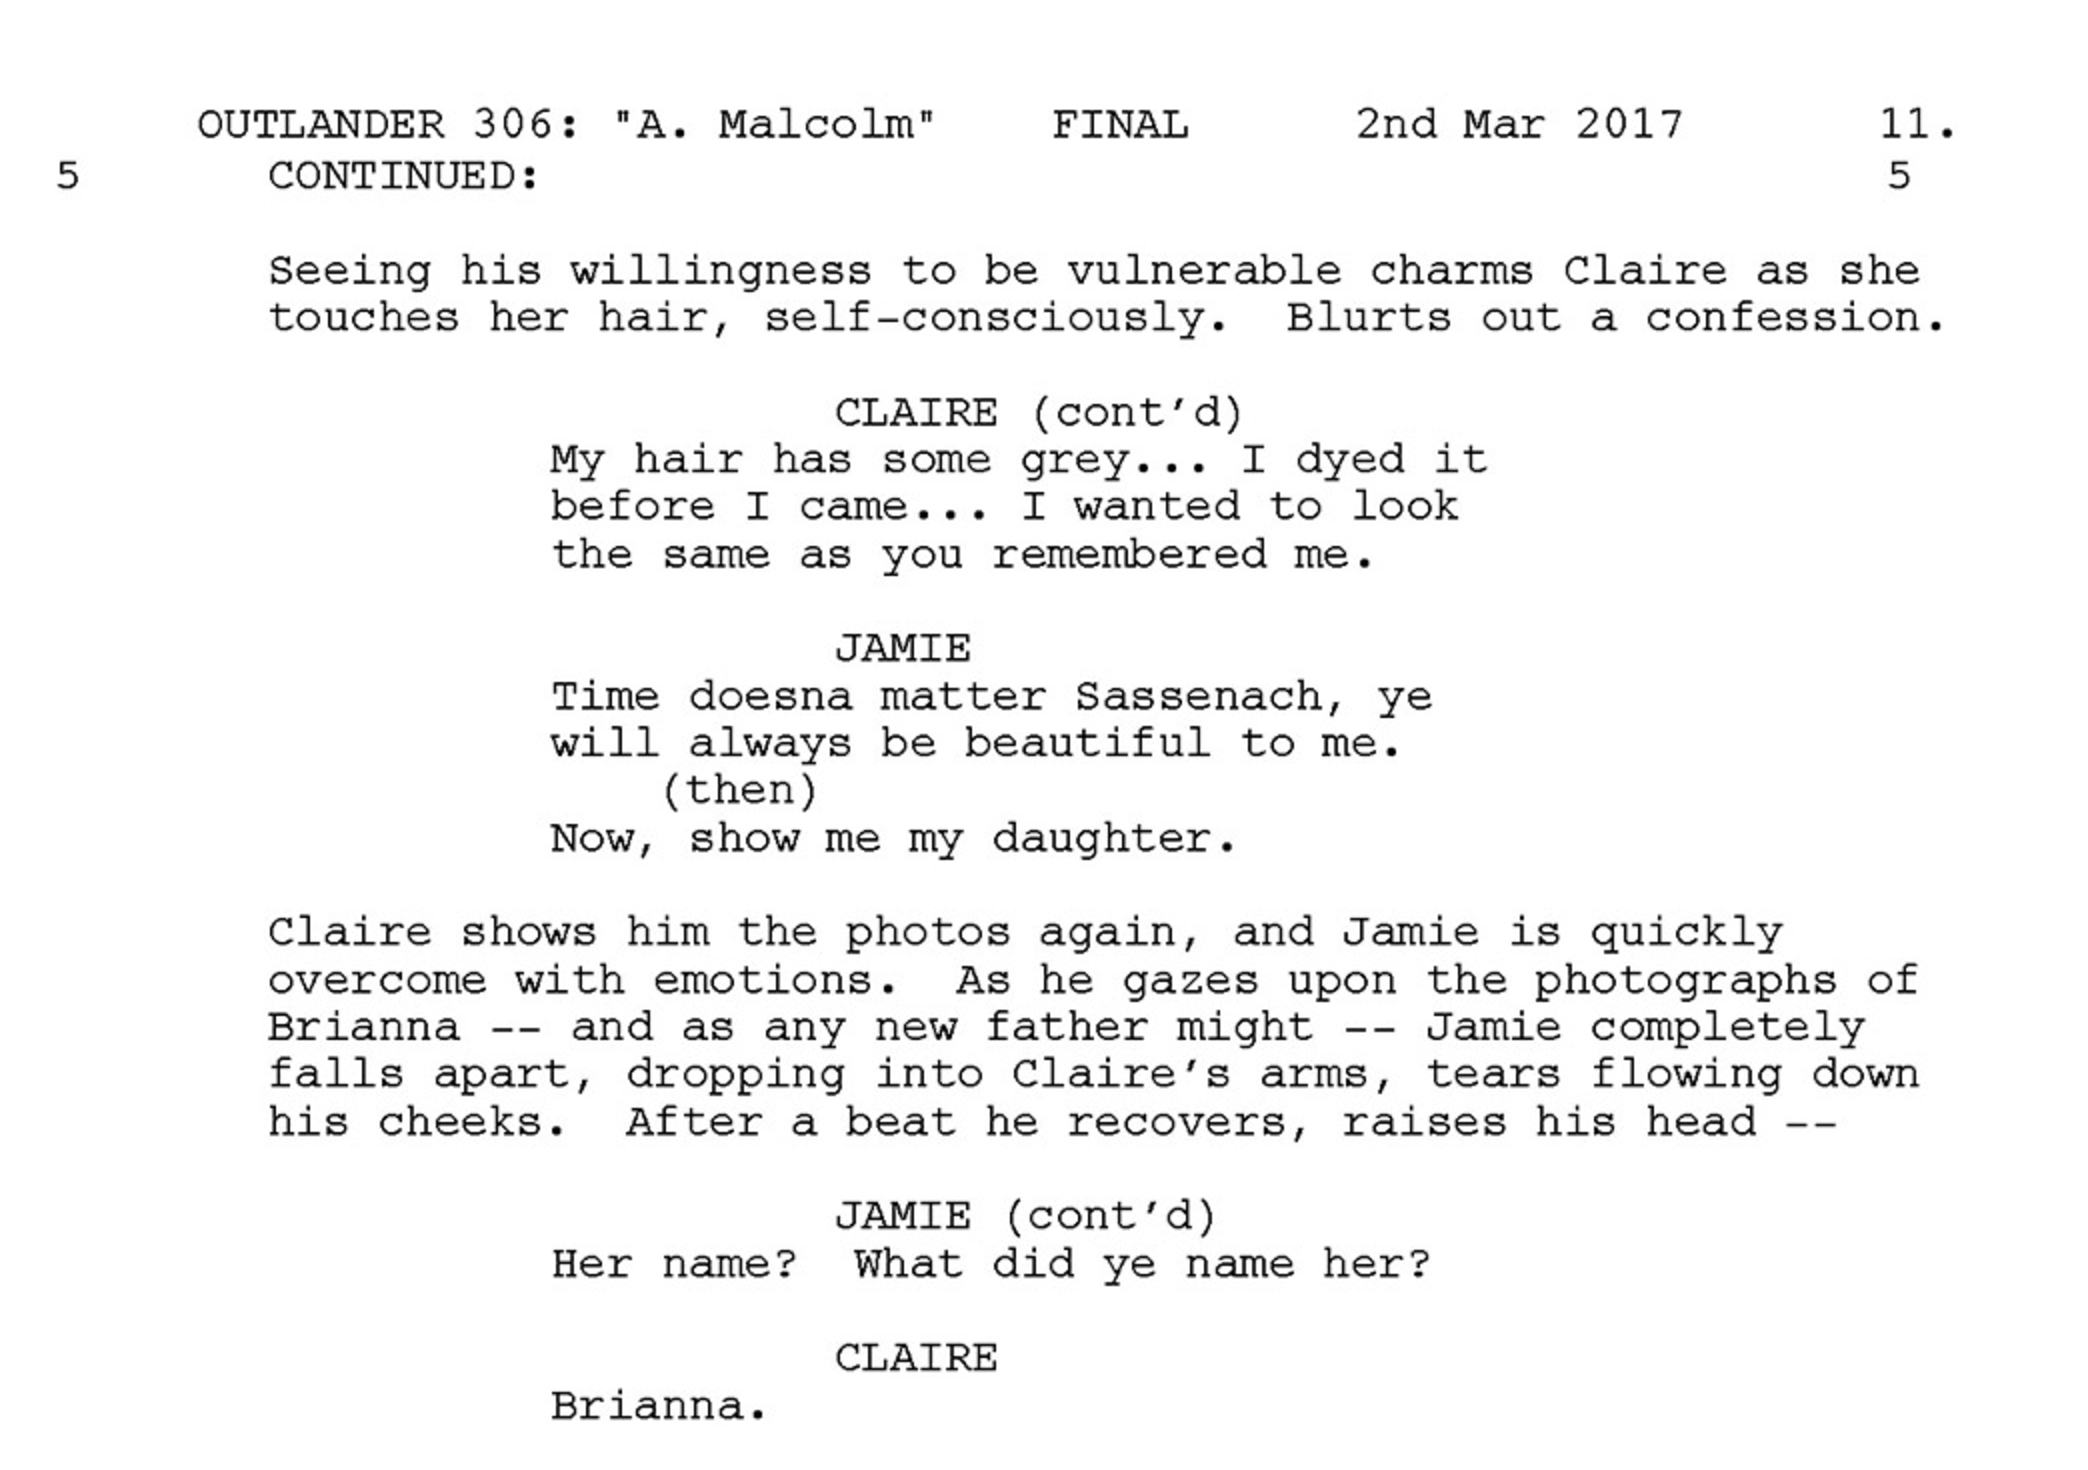 outlander-306-falling-to-pieces-scene-script-page-11